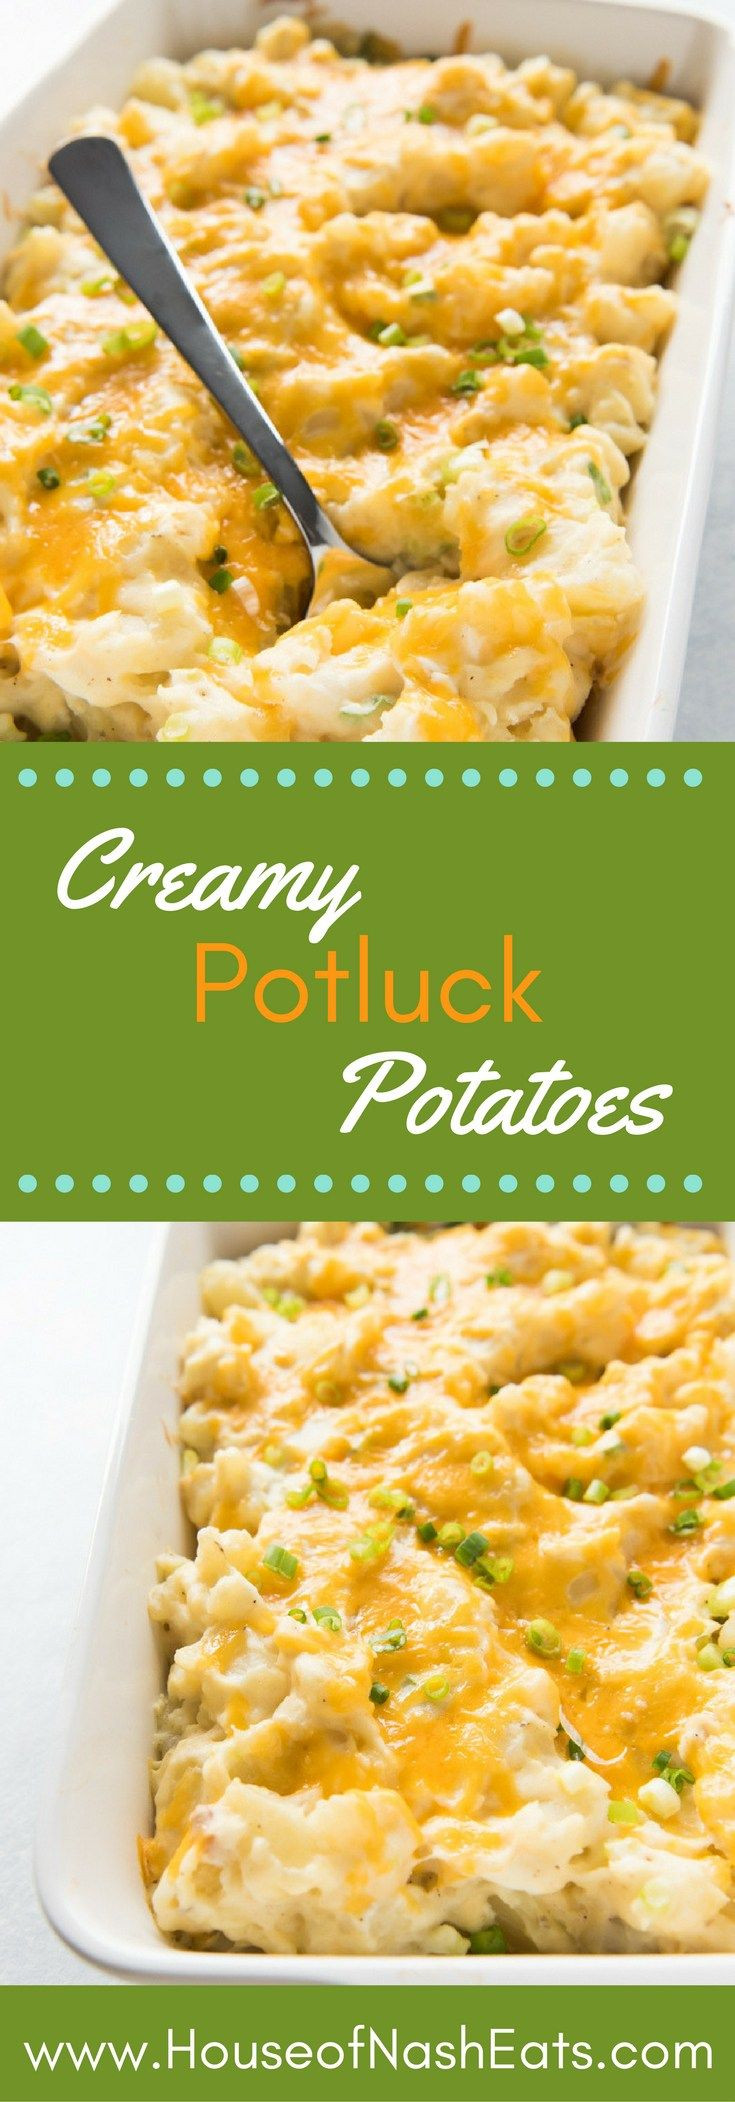 Side Dishes For Christmas Potluck
 Best 20 Church potluck recipes ideas on Pinterest